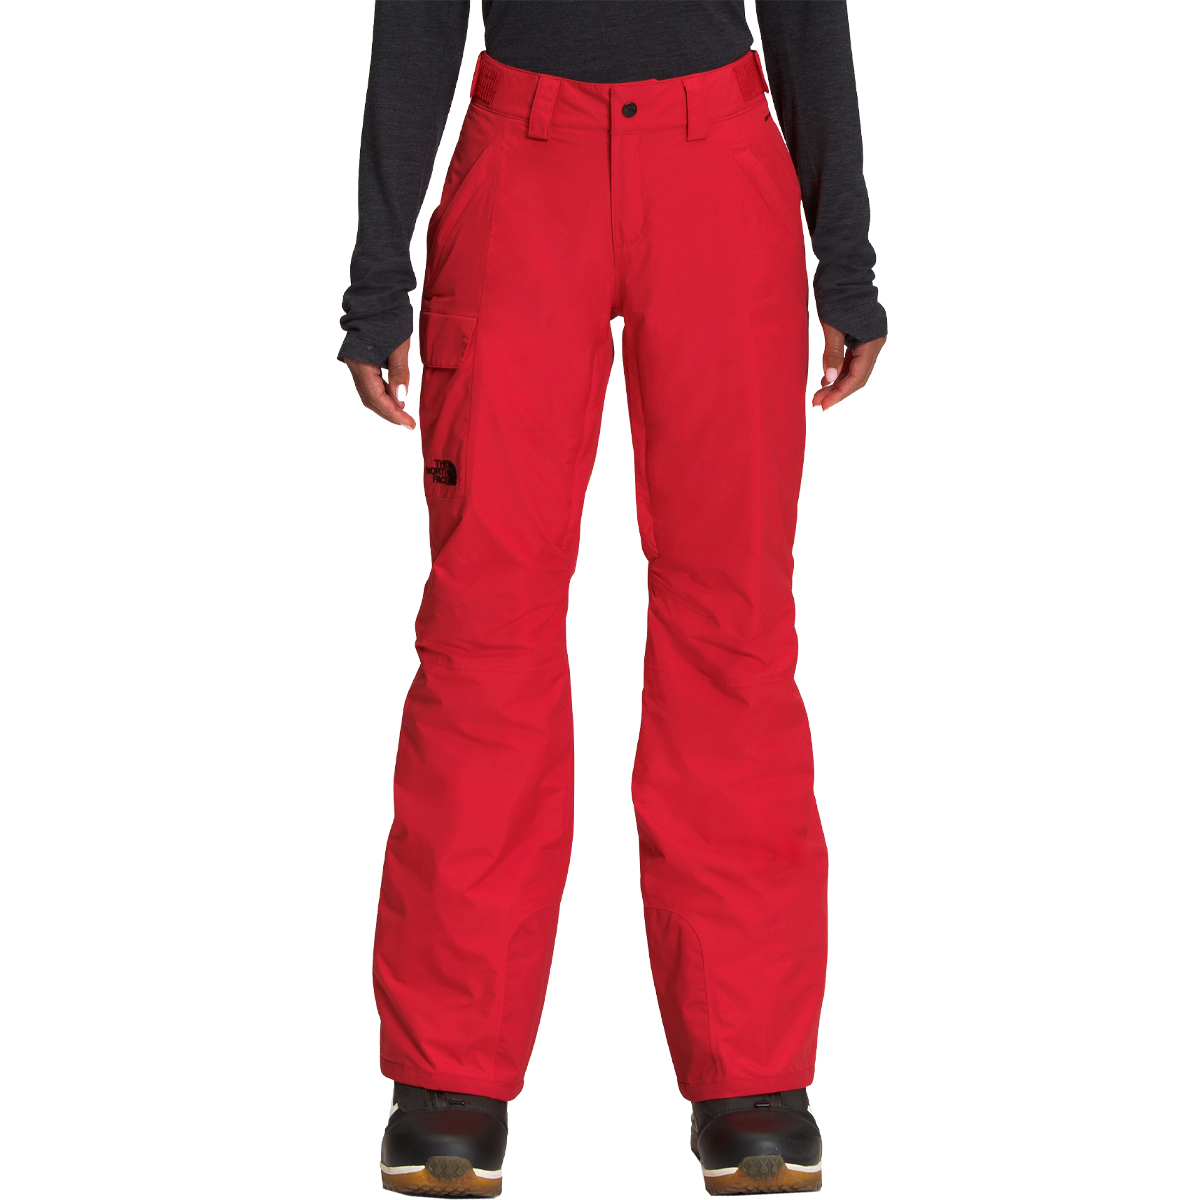 Prairie Summit Shop - The North Face Women's Freedom Insulated Pant